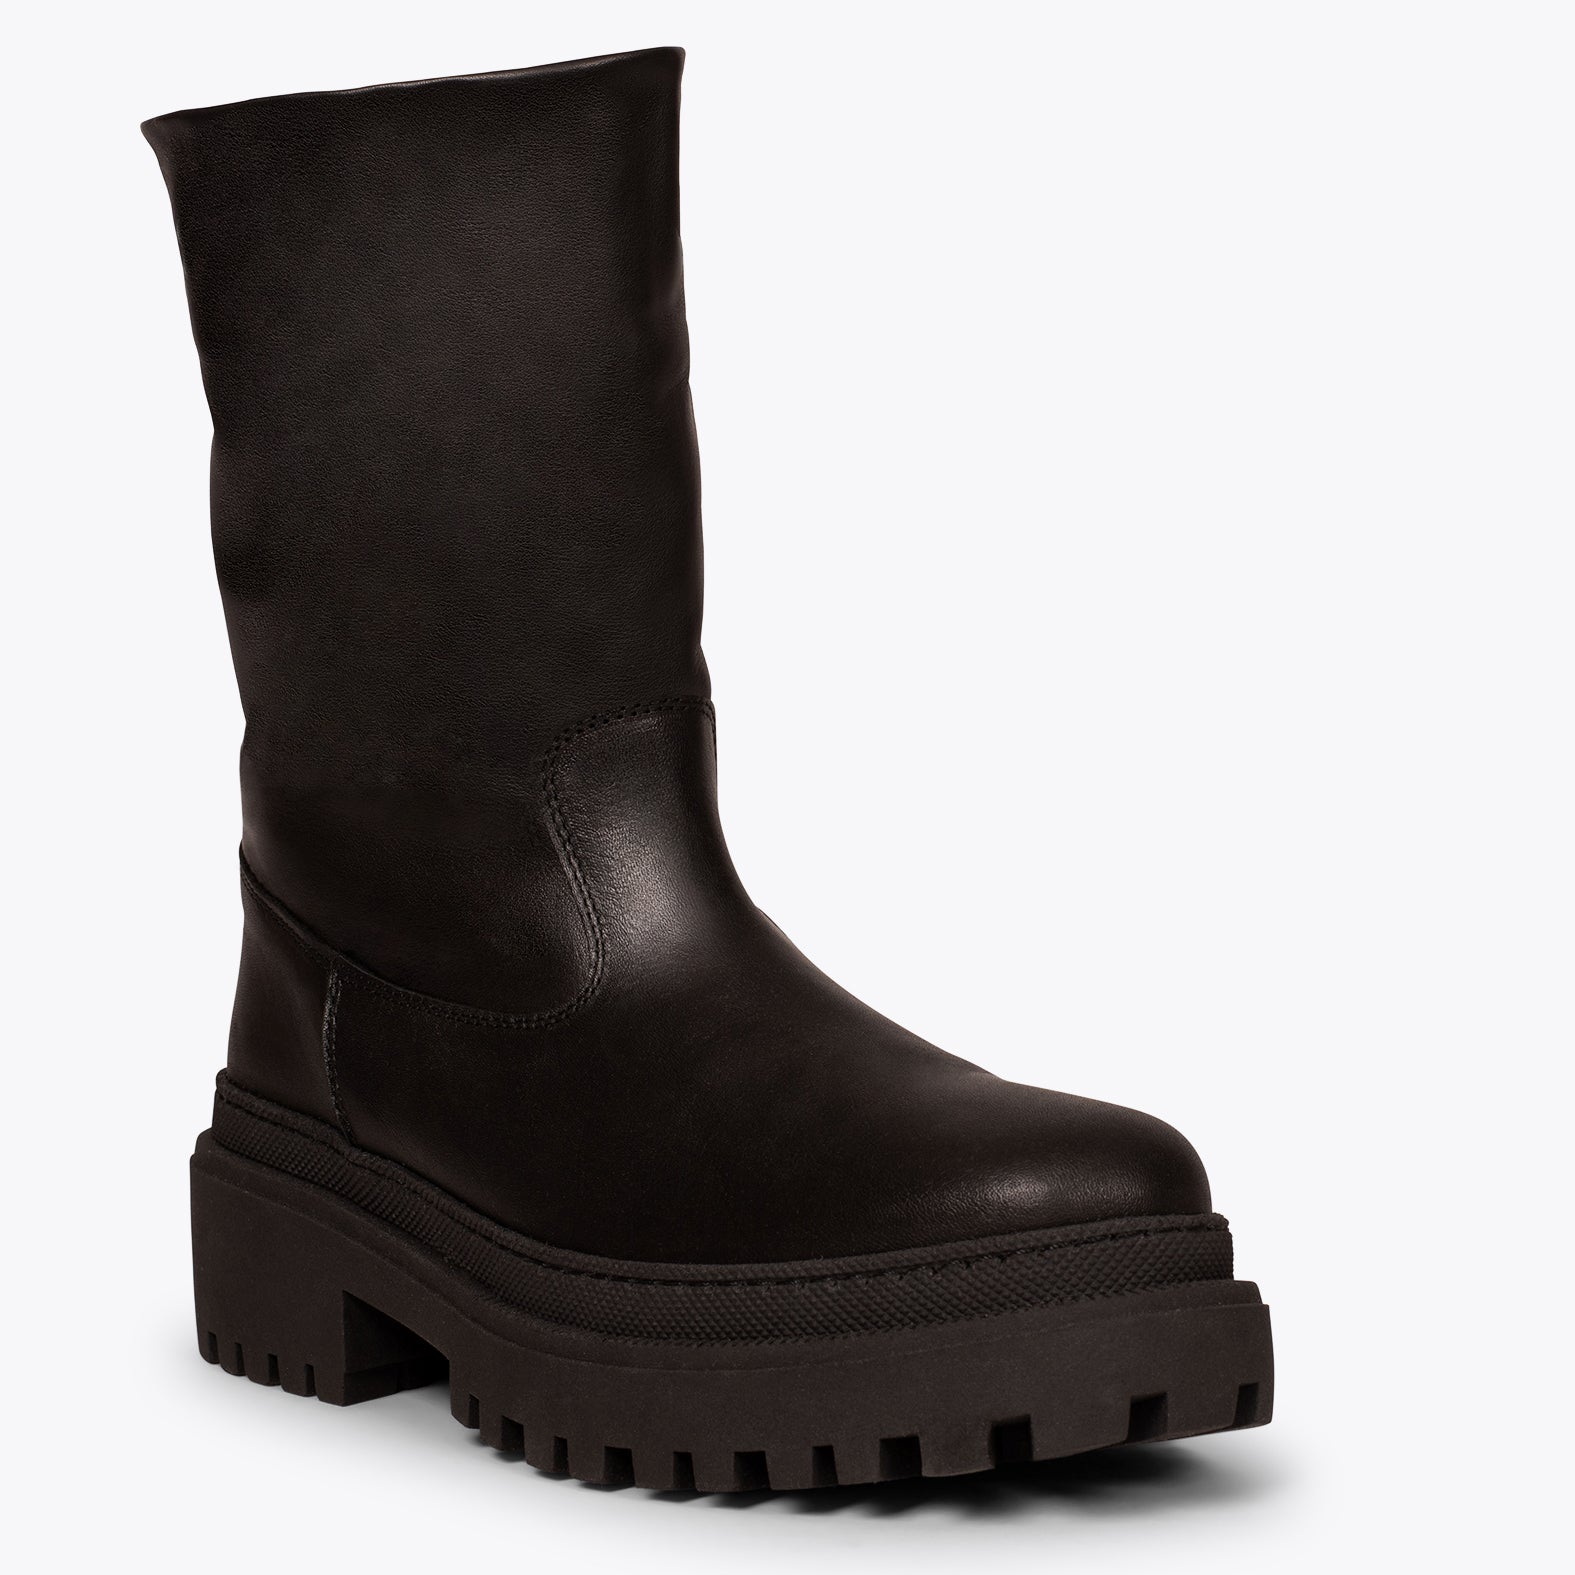 POLAR – BLACK boot crafted in soft nappa leather